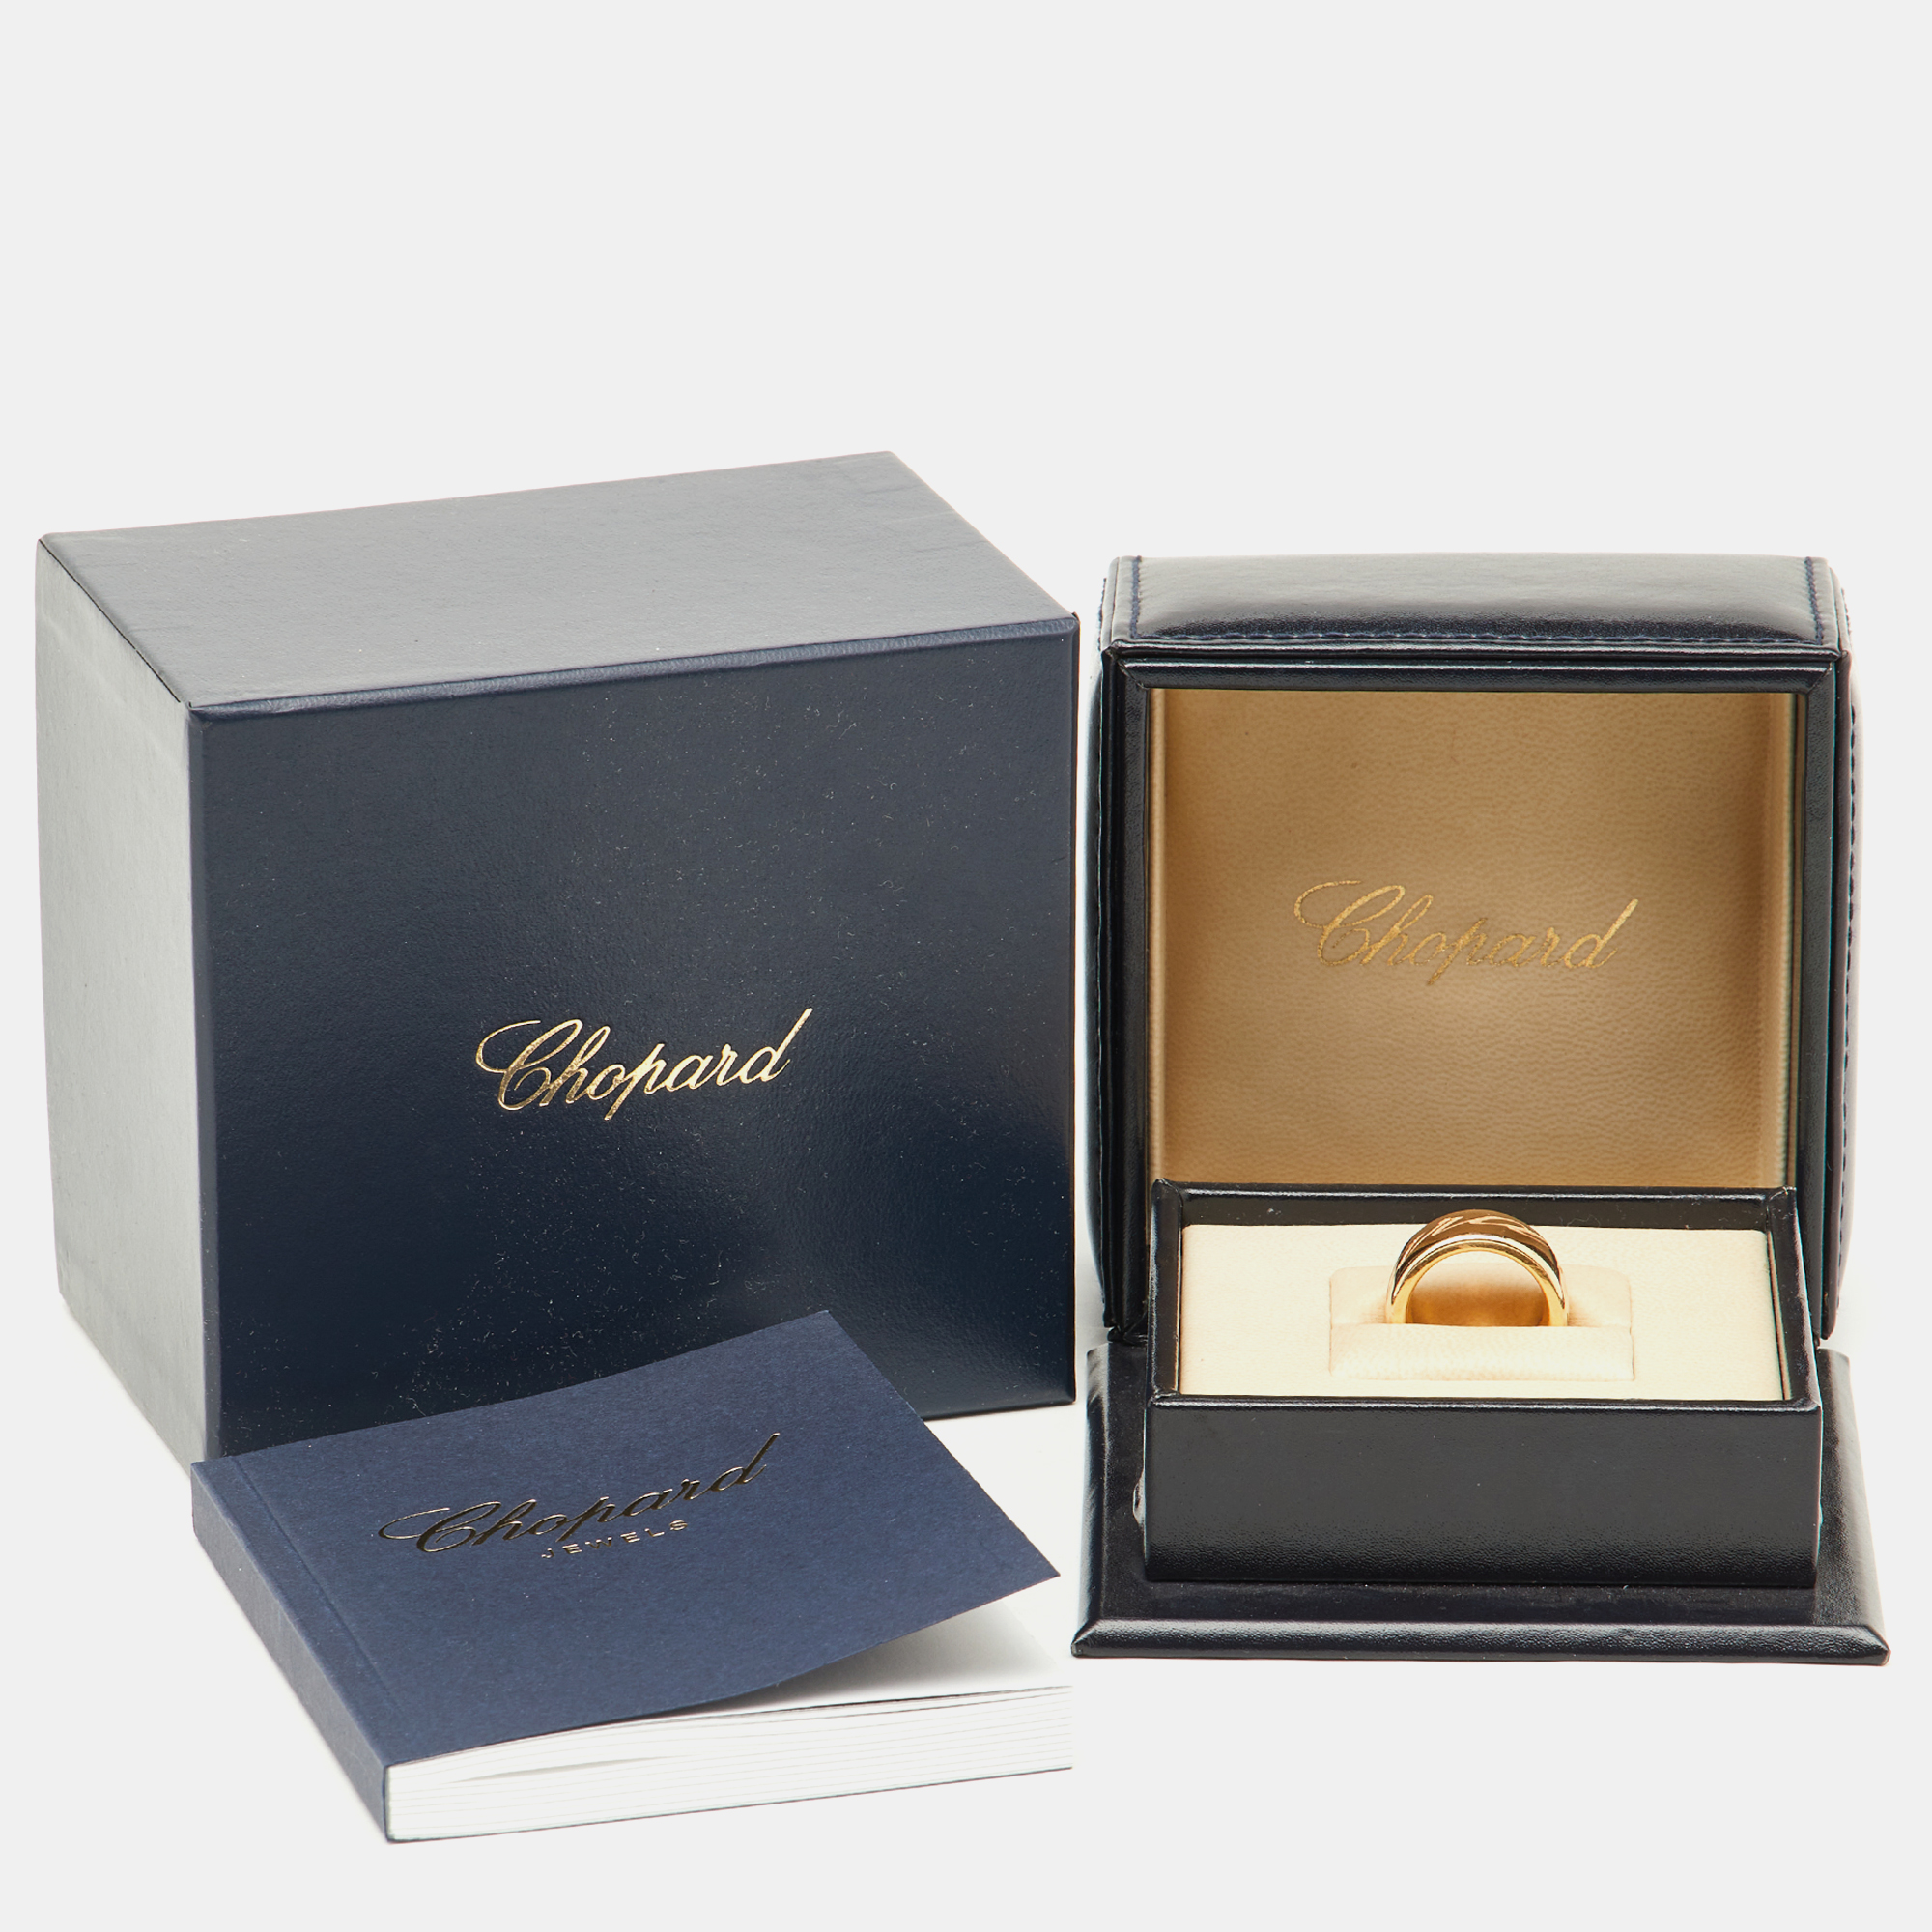 Chopard Chopardissimo Revolving Signature 18k Rose Gold Wide Band Ring Size 52